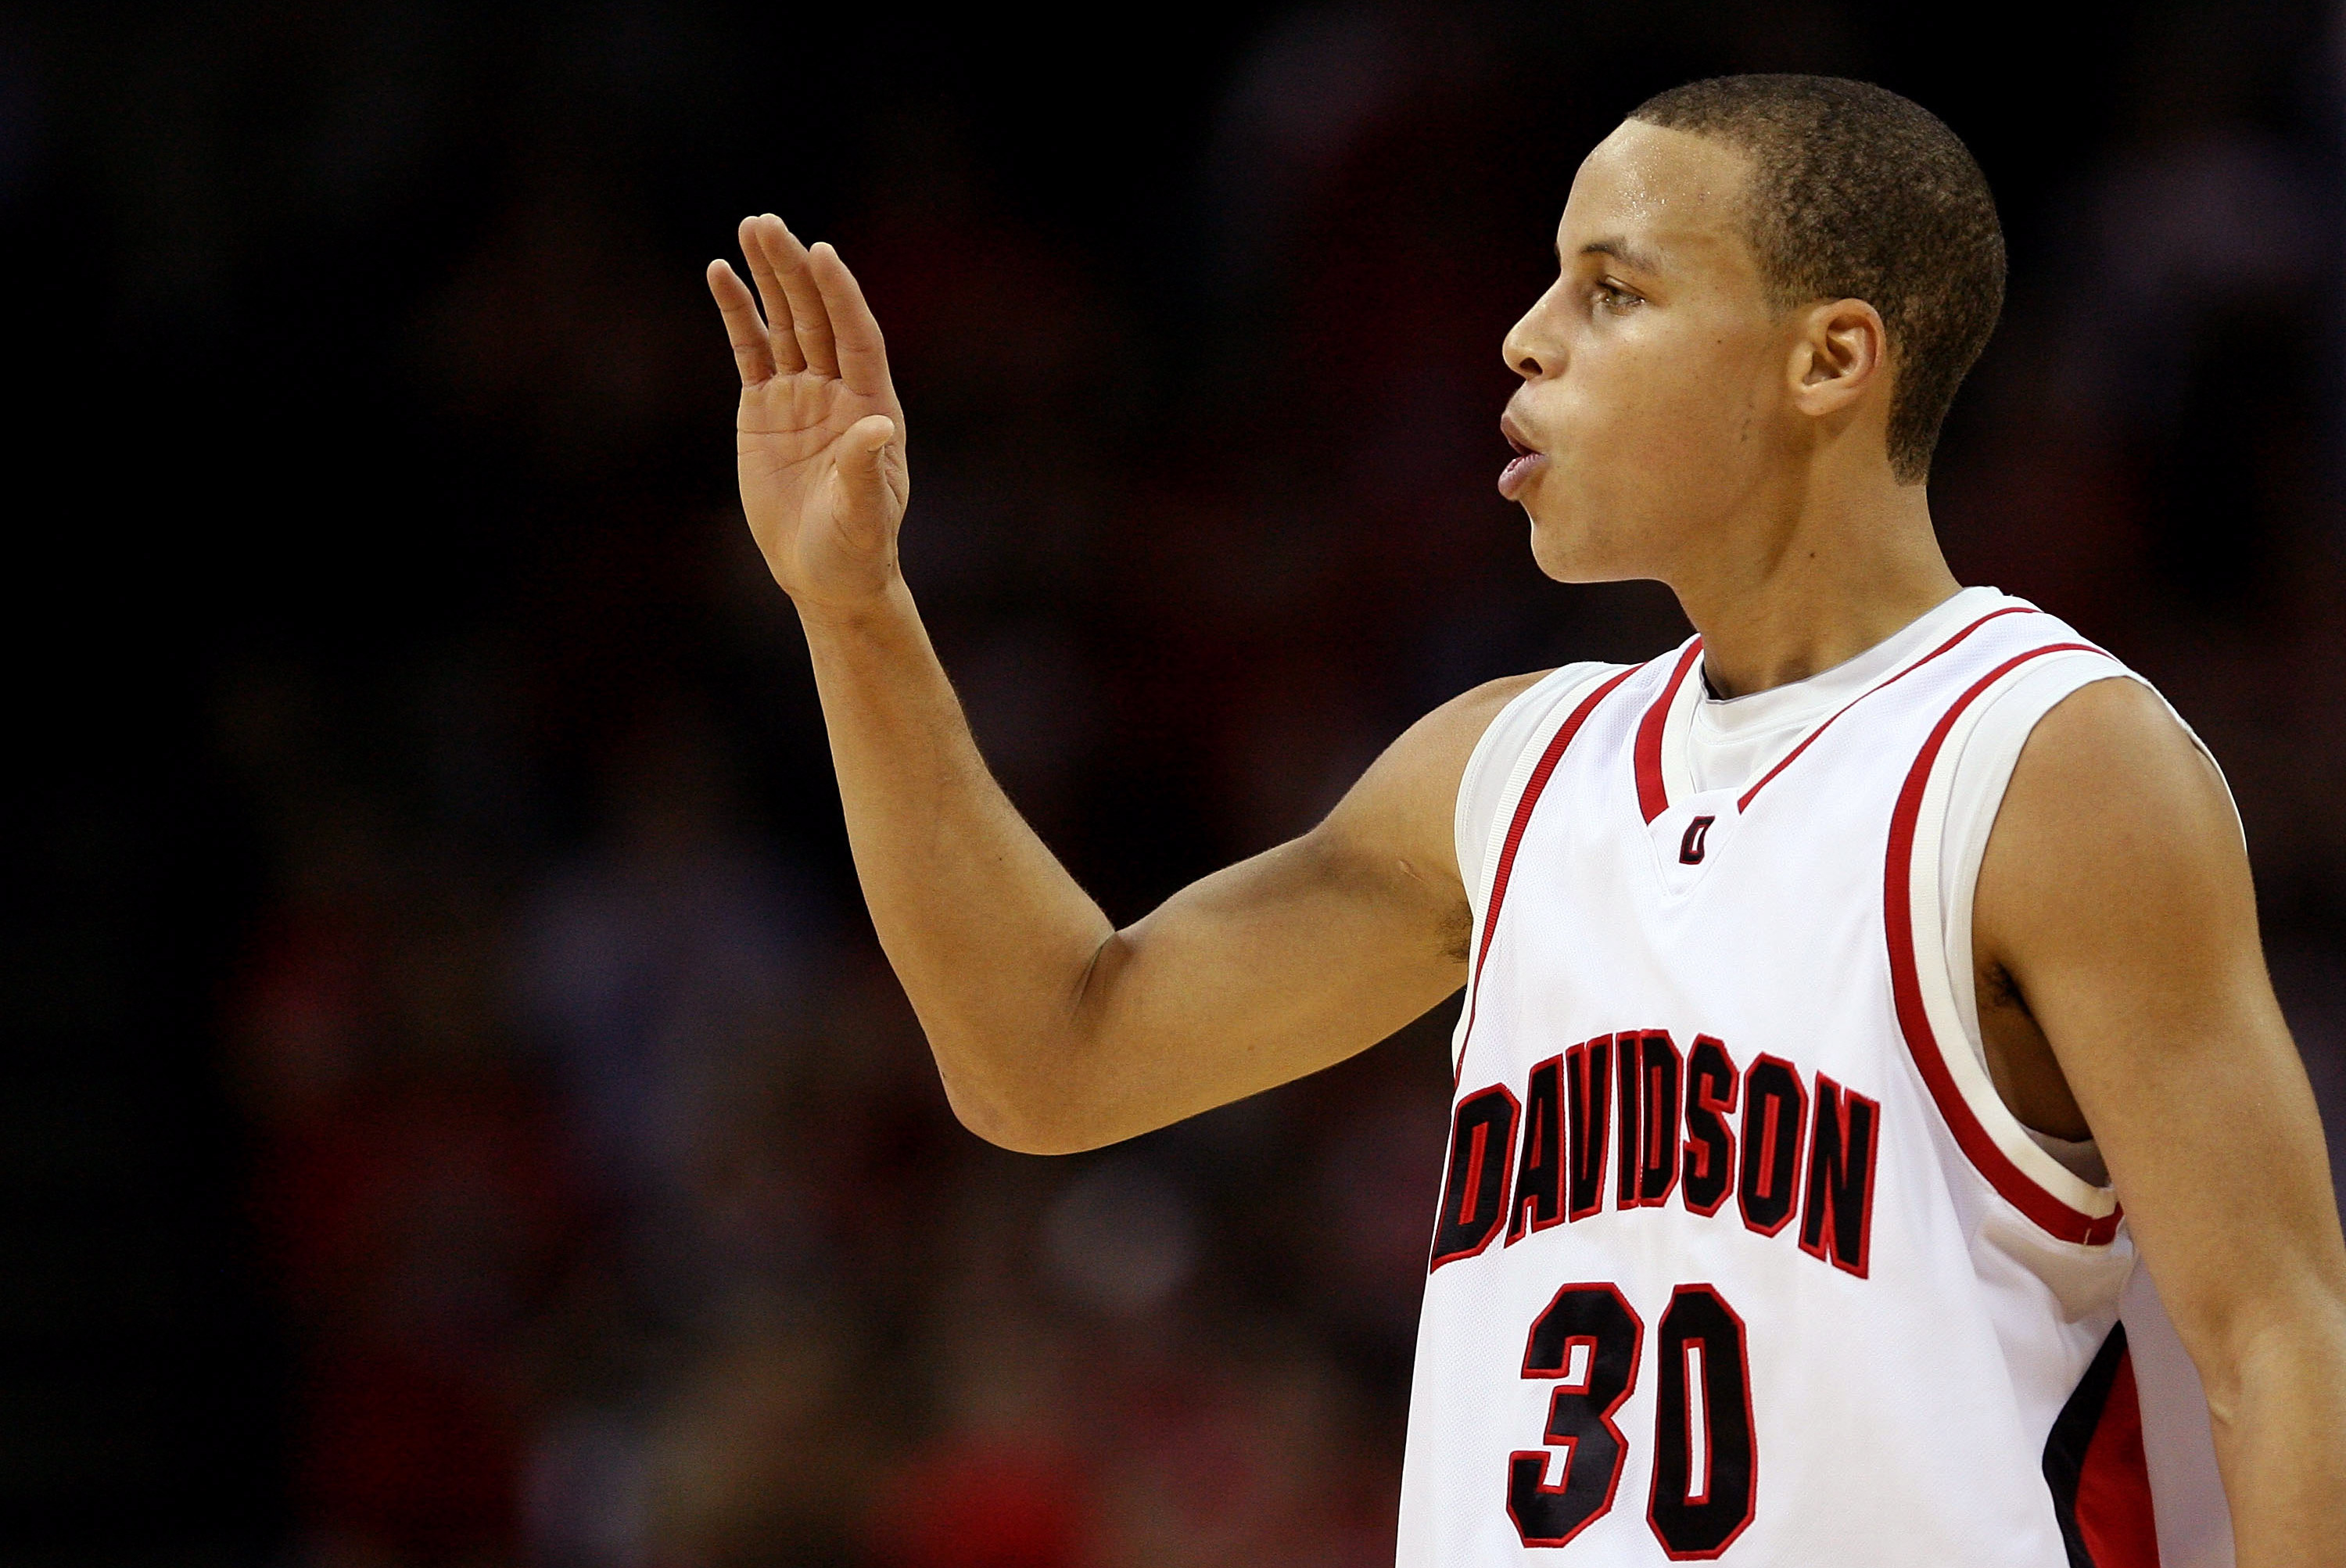 Look at Steph Curry's Davidson career ahead of jersey retirement